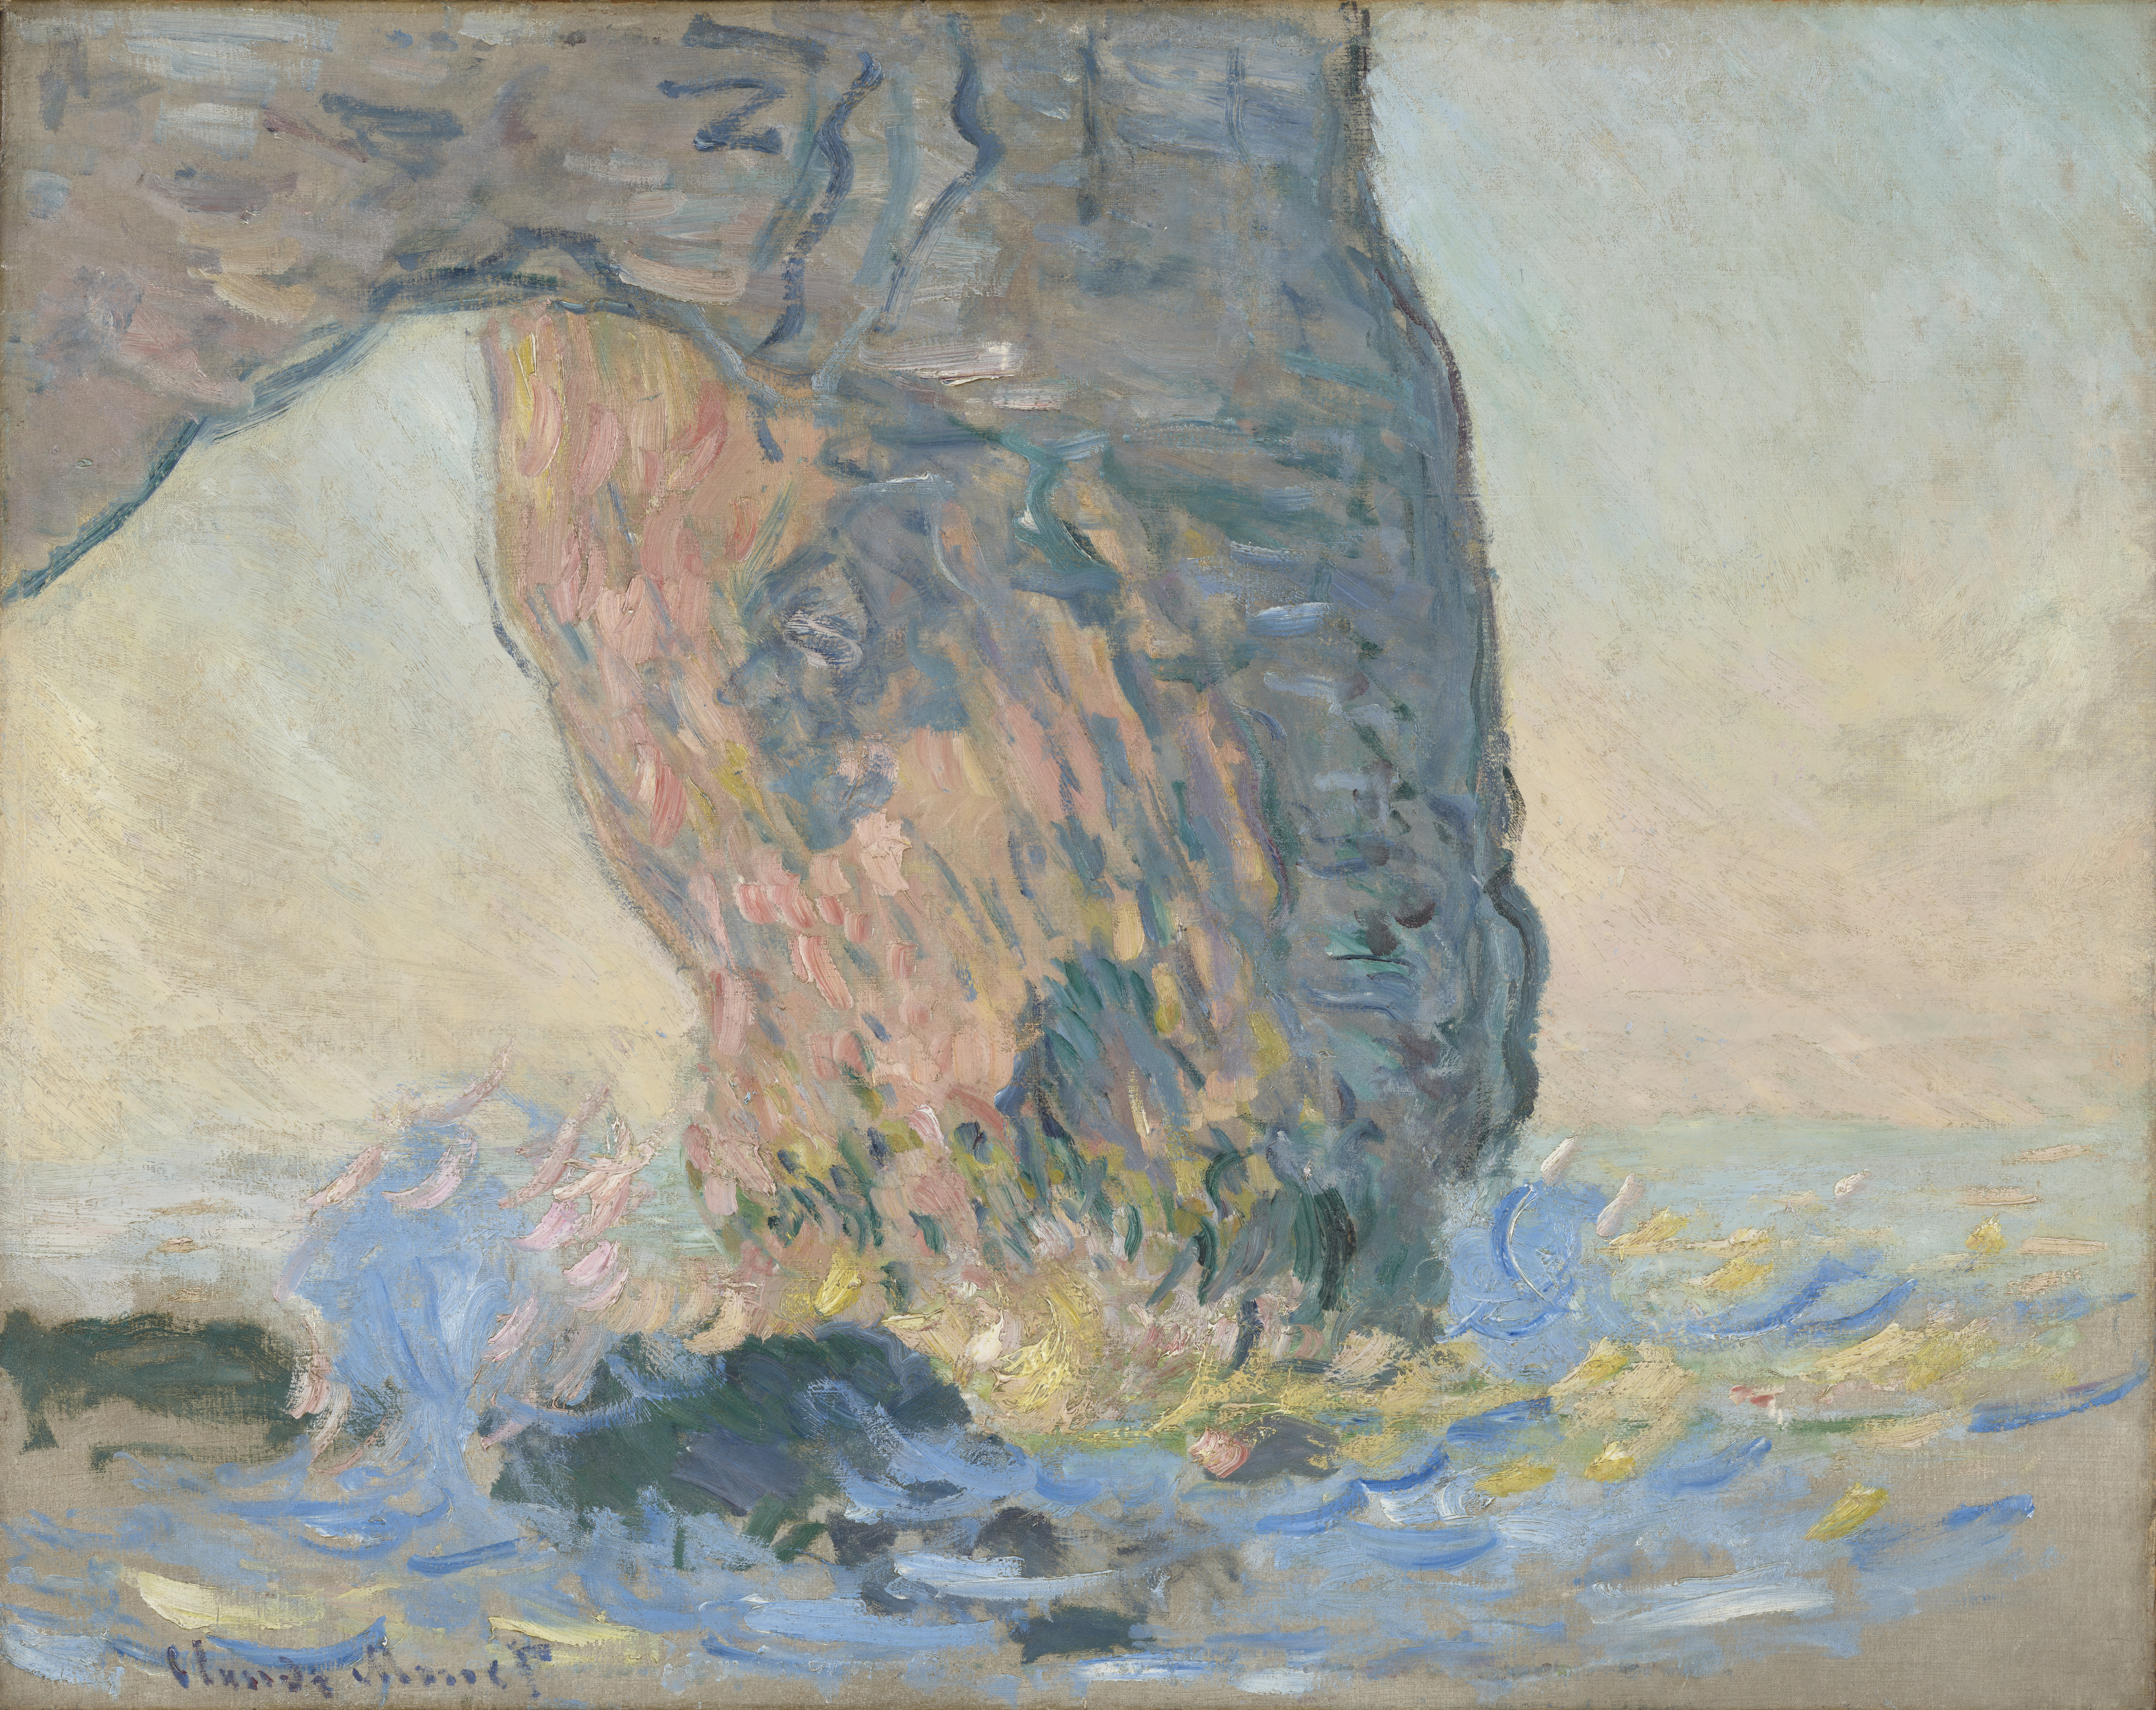 An oil painting of waves crashing against a large, arched rock formation in the ocean at sunset.